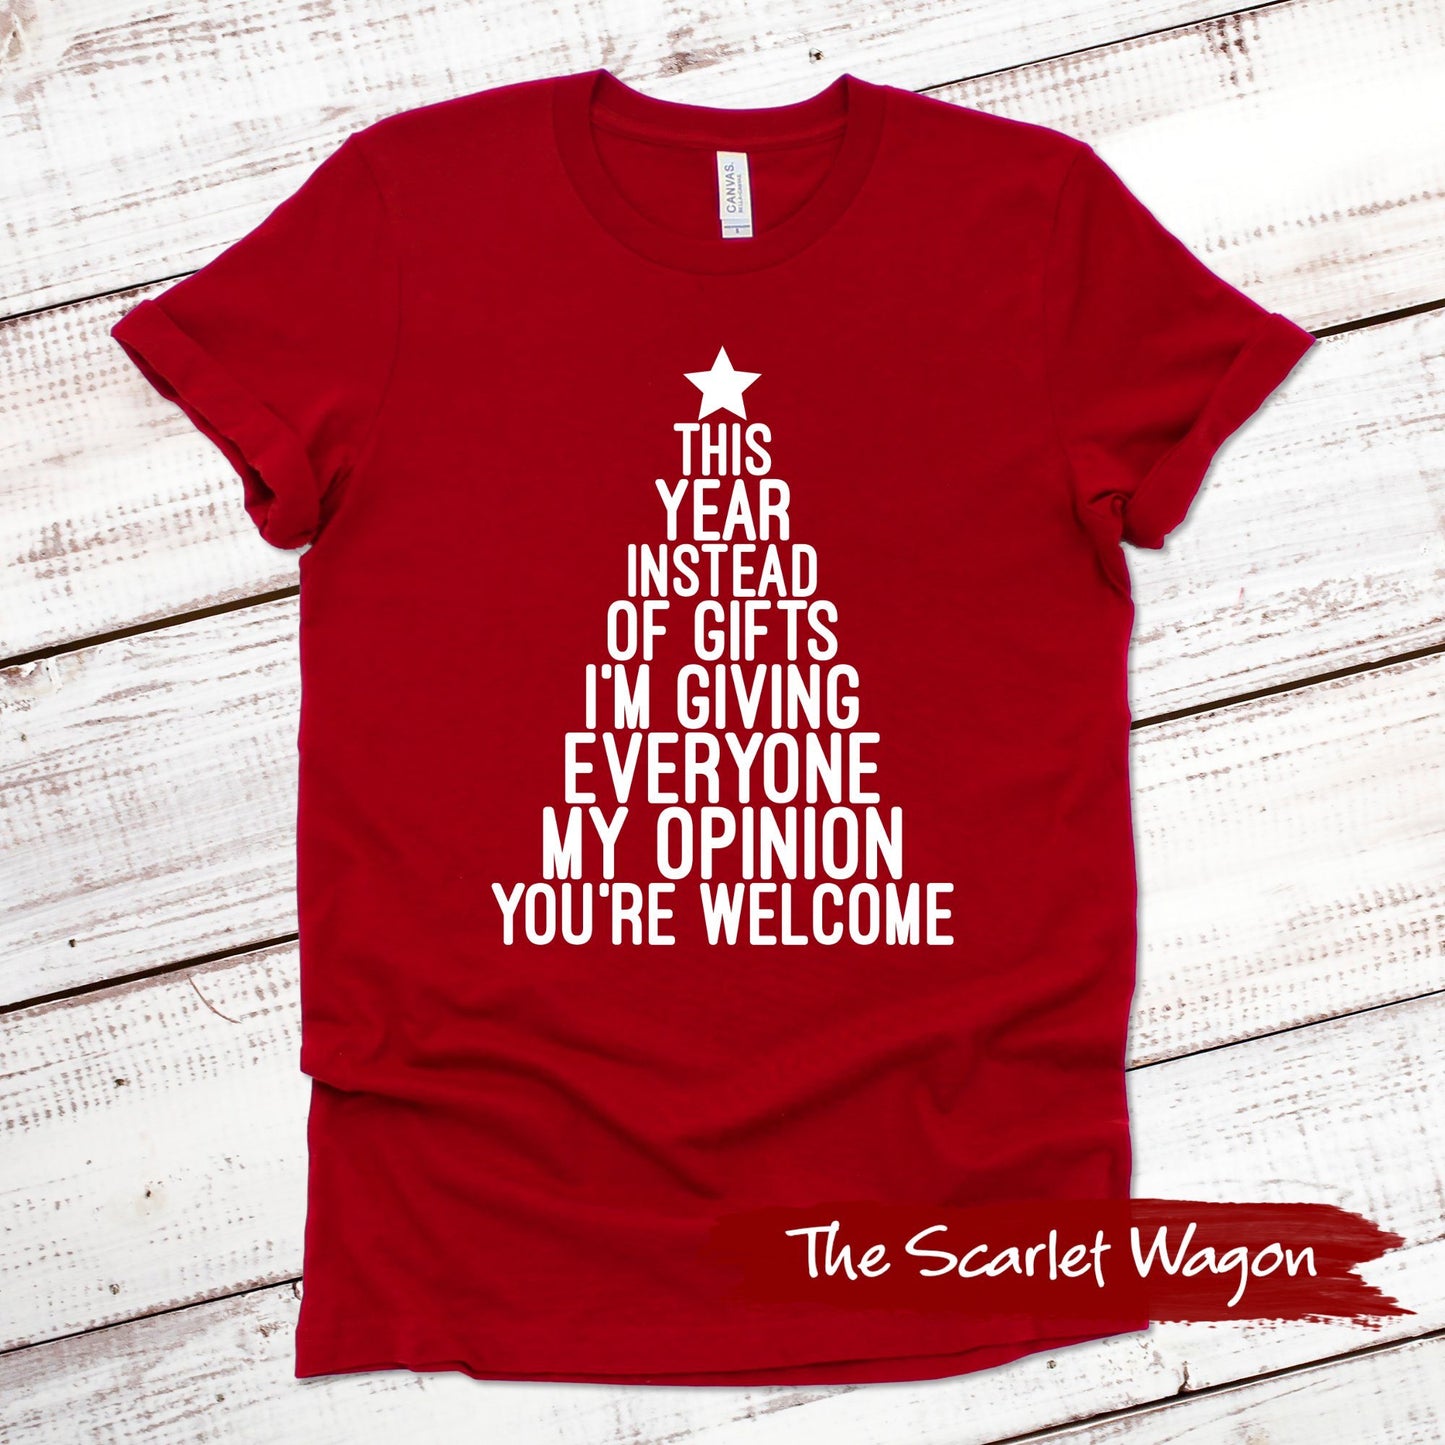 Instead of Gifts I'm Giving My Opinion Christmas Shirt Scarlet Wagon Red XS 